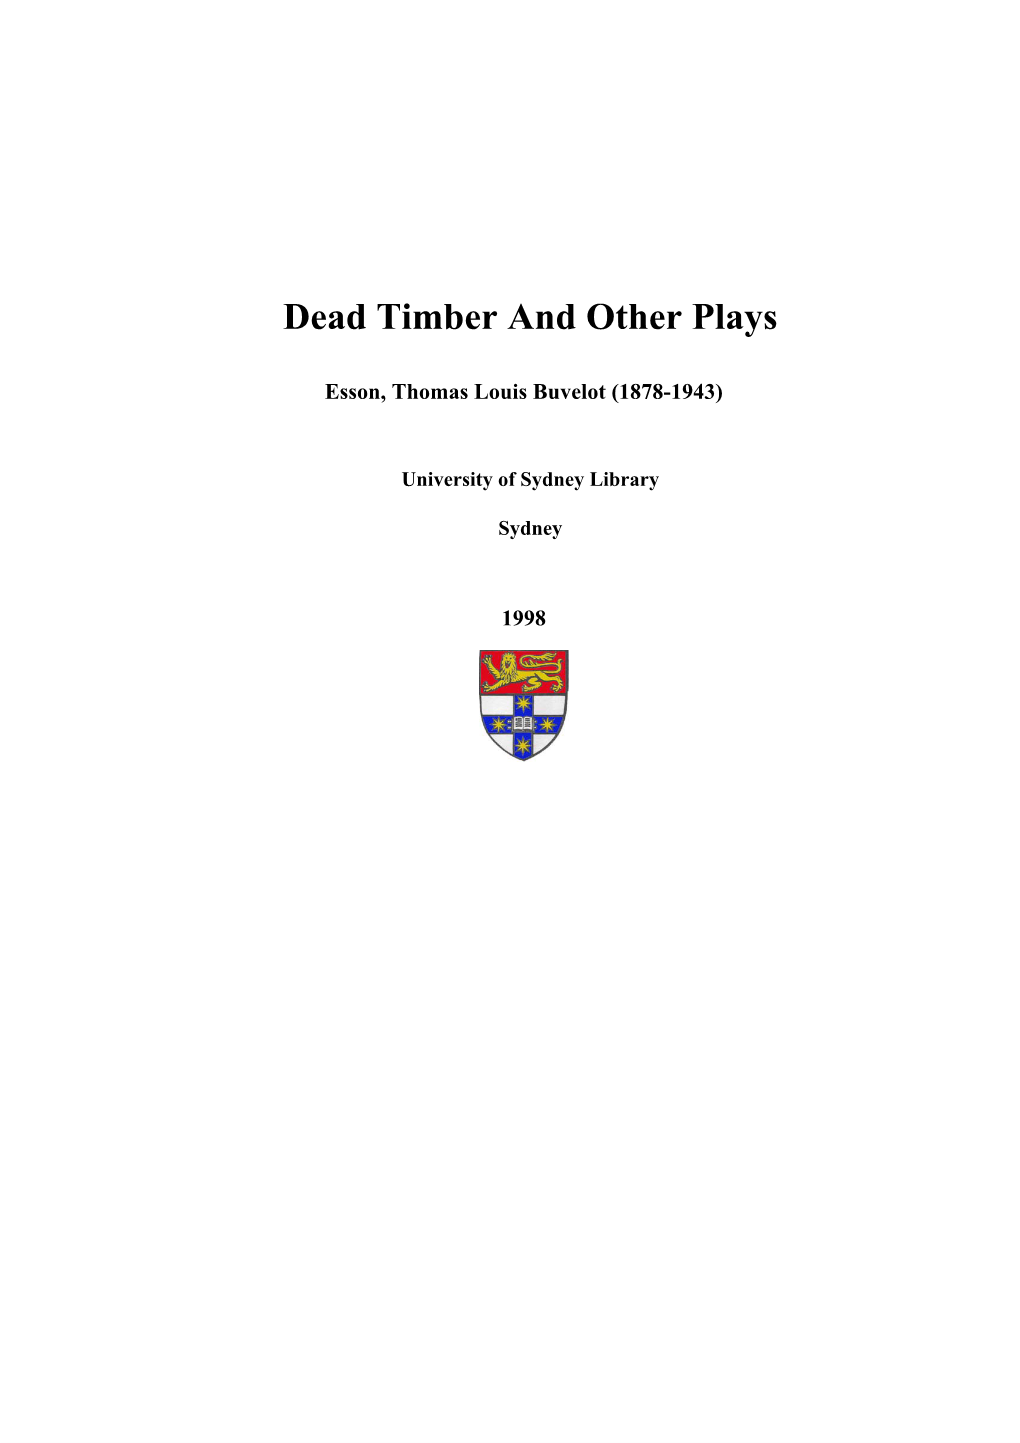 Dead Timber and Other Plays